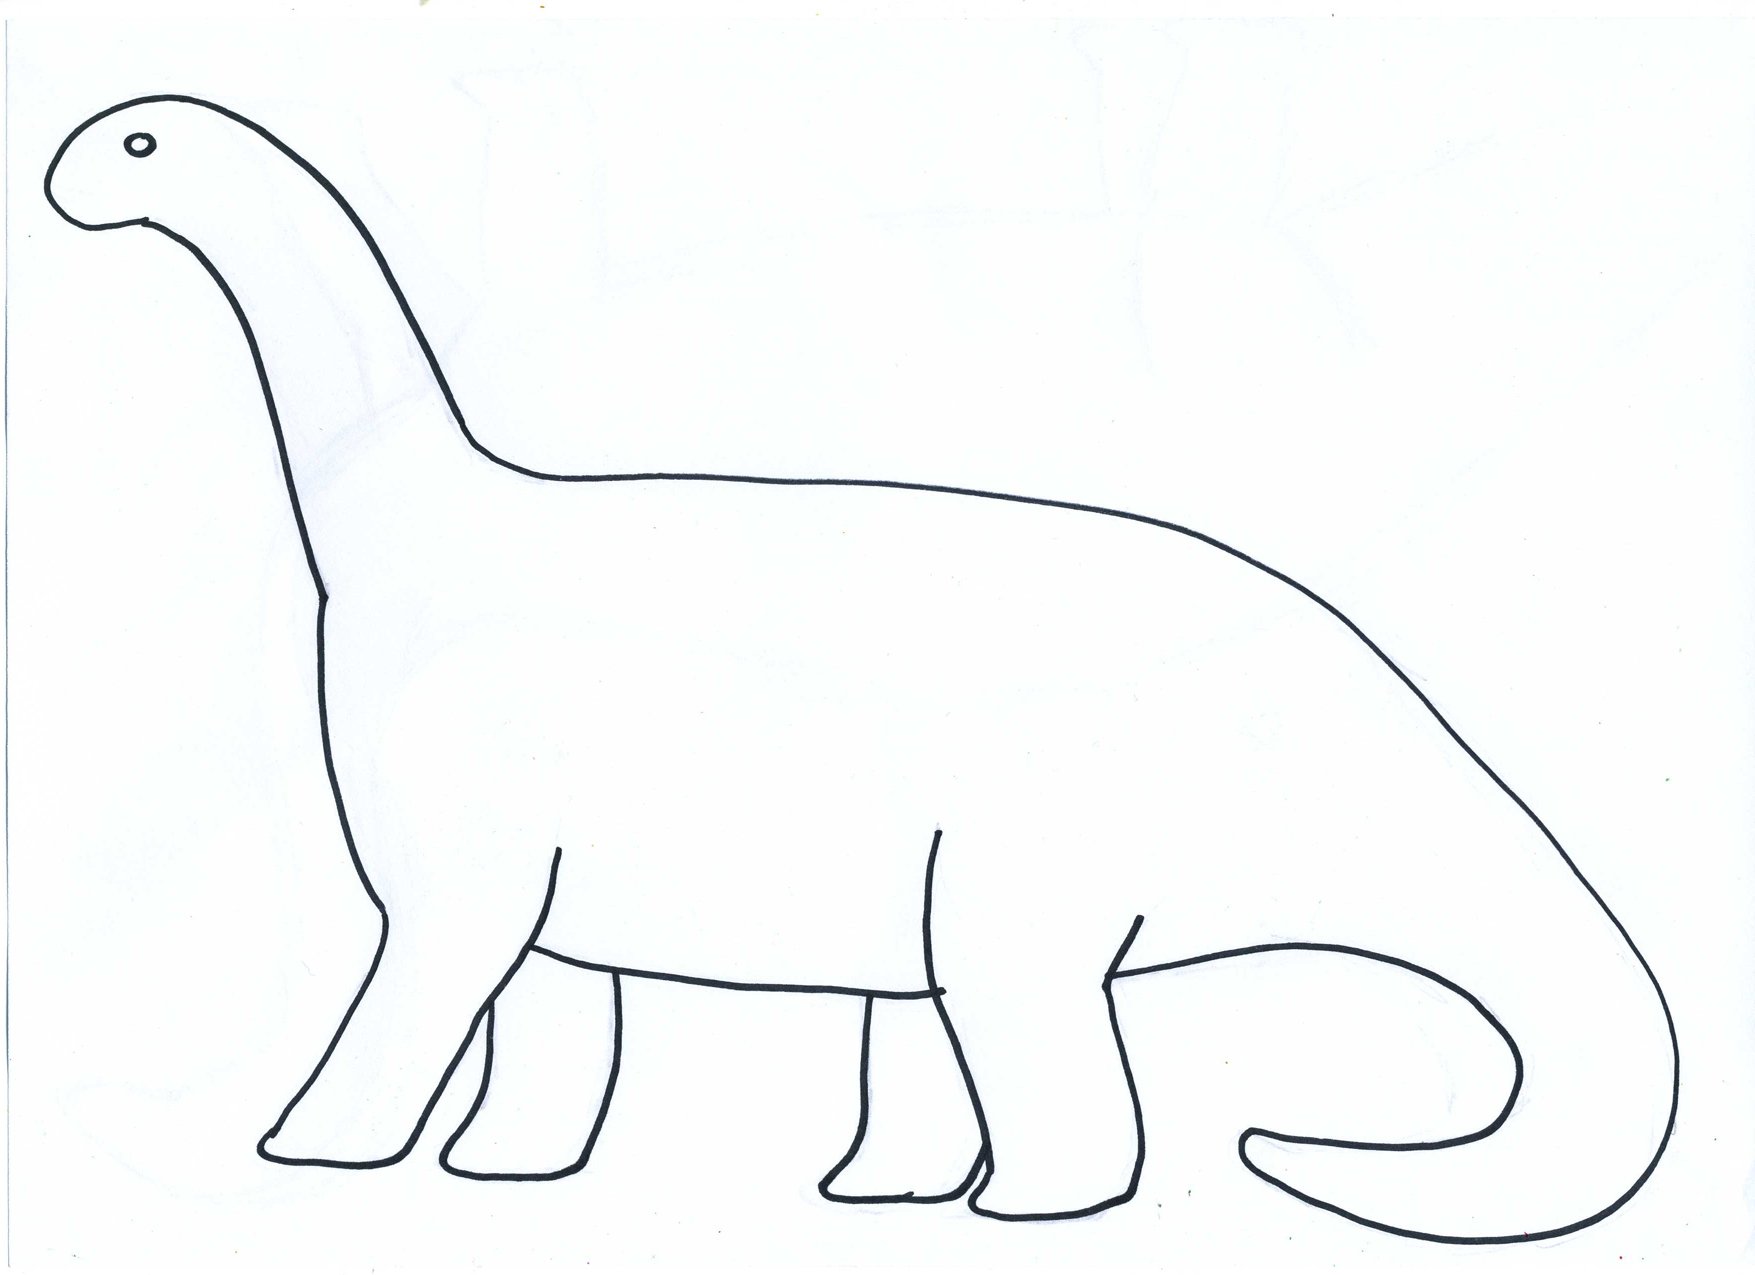 Free Dinosaur Template Download Free Dinosaur Template Png Images 